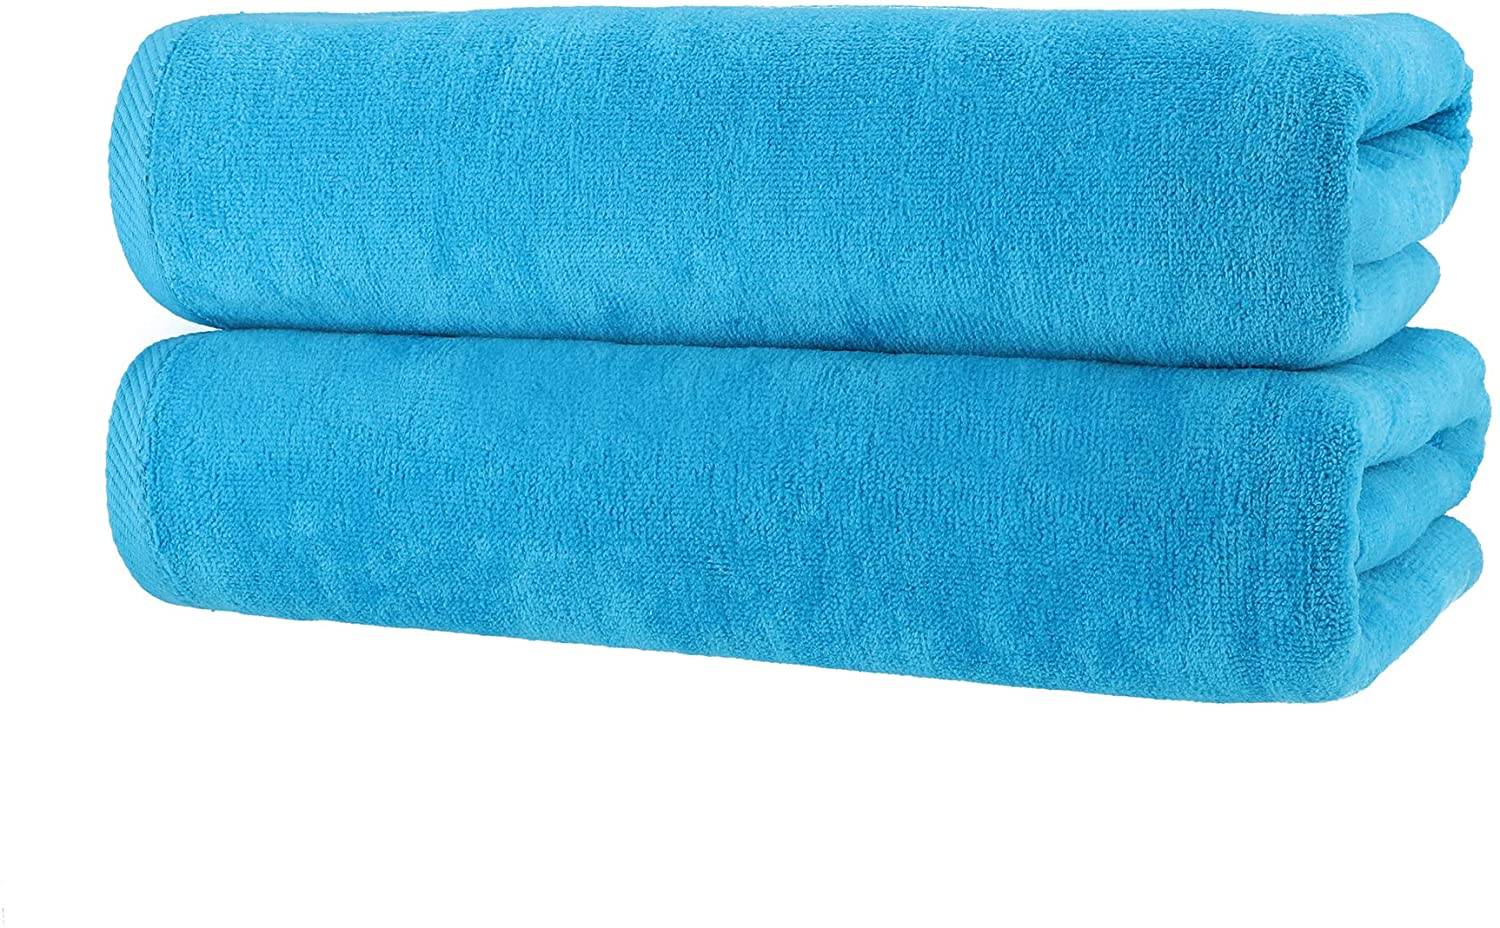 Bottom price Hooded Towel - Royal Comfort and soft Solid Color Velour Terry Beach Towel with bright colors, made of 100% cotton.  – SUPER